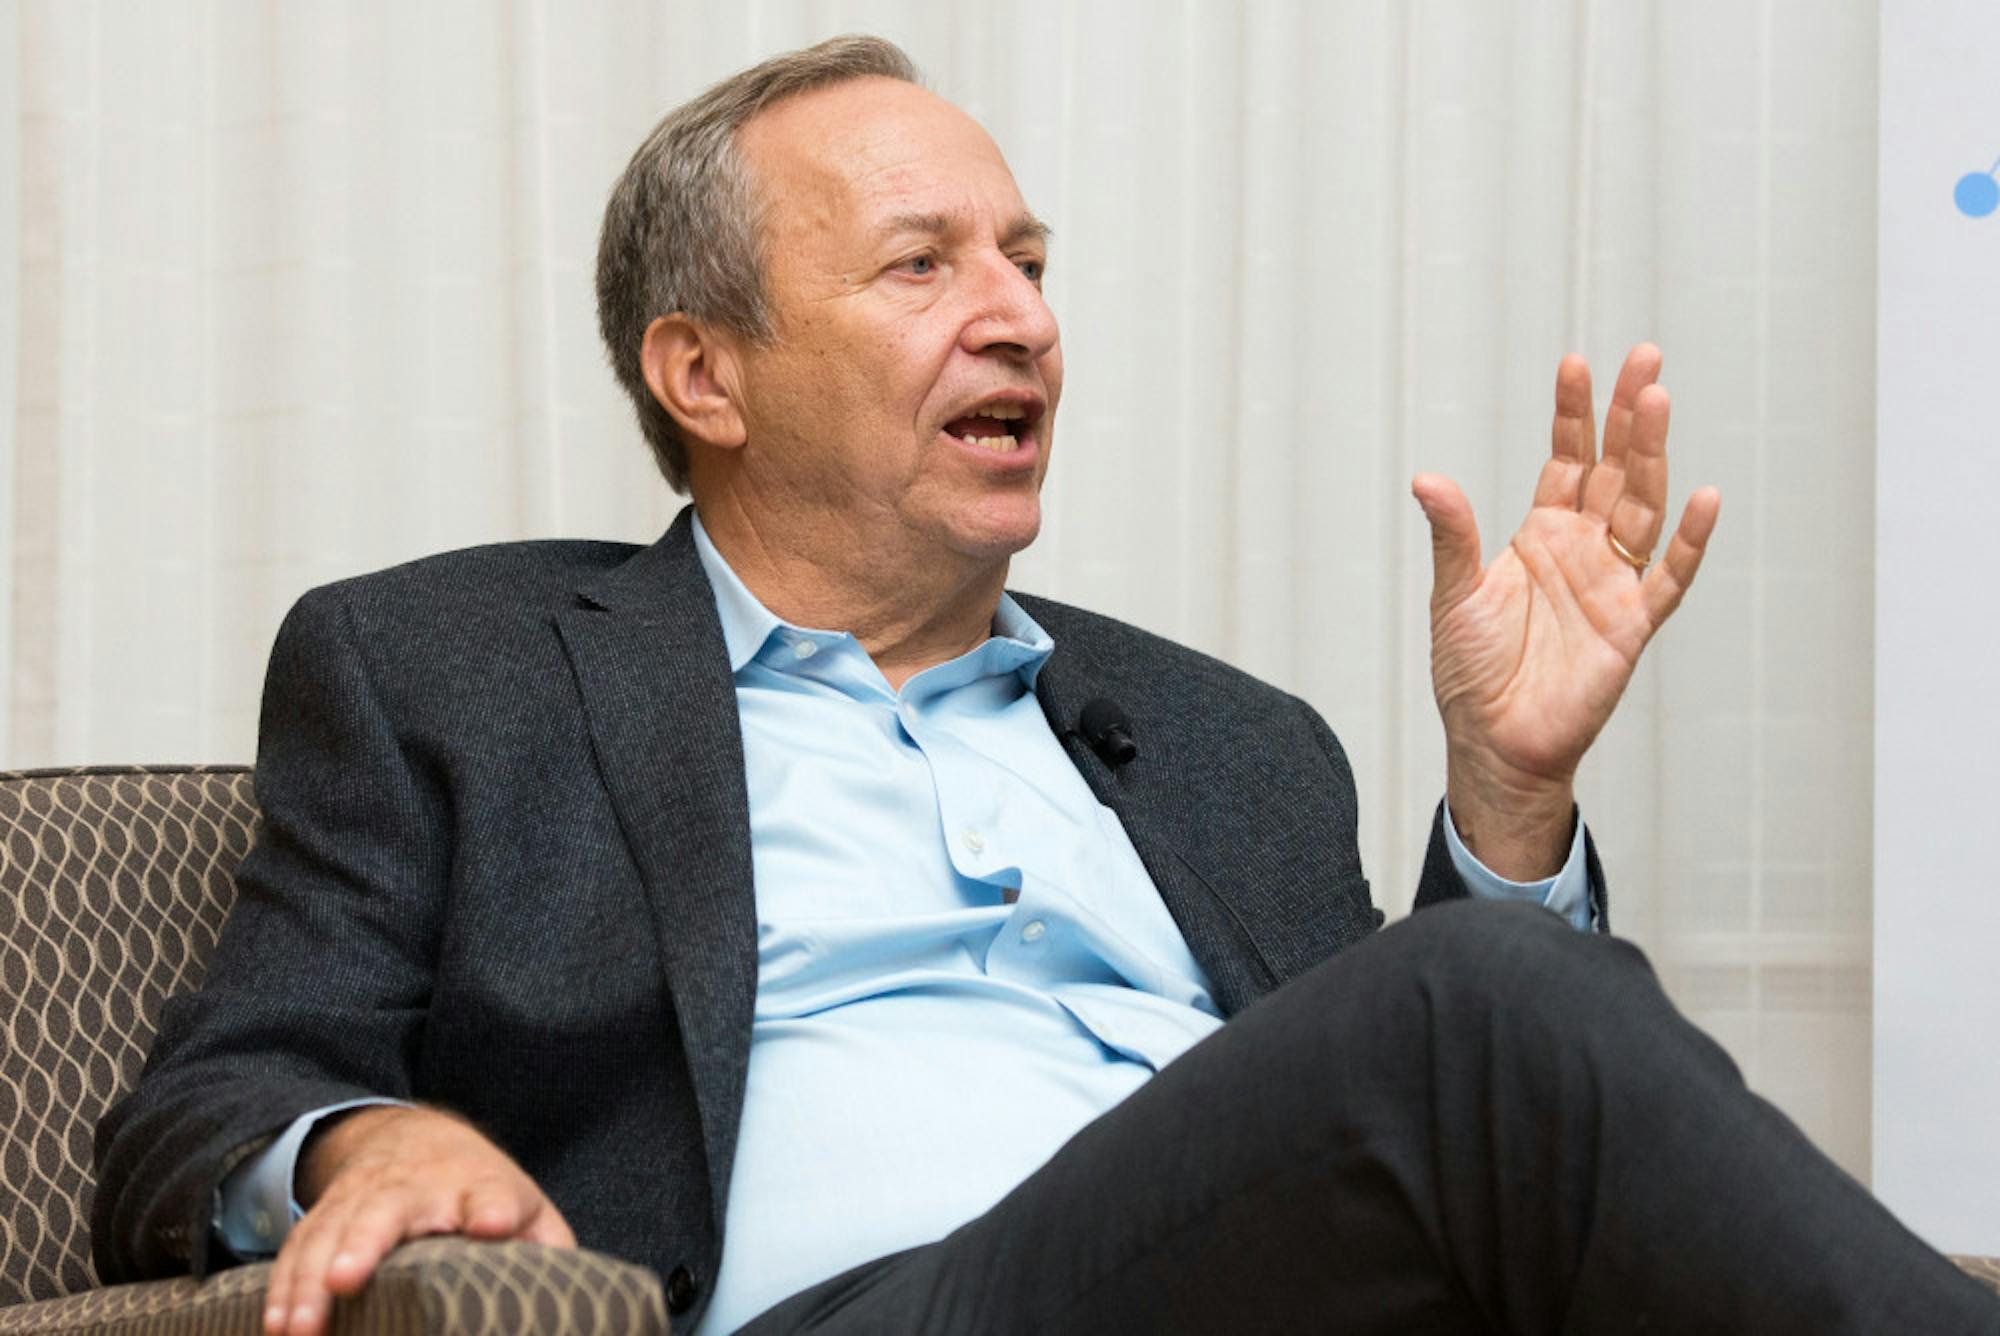 2015-10-27-Larry-Summers-Lecture-8497